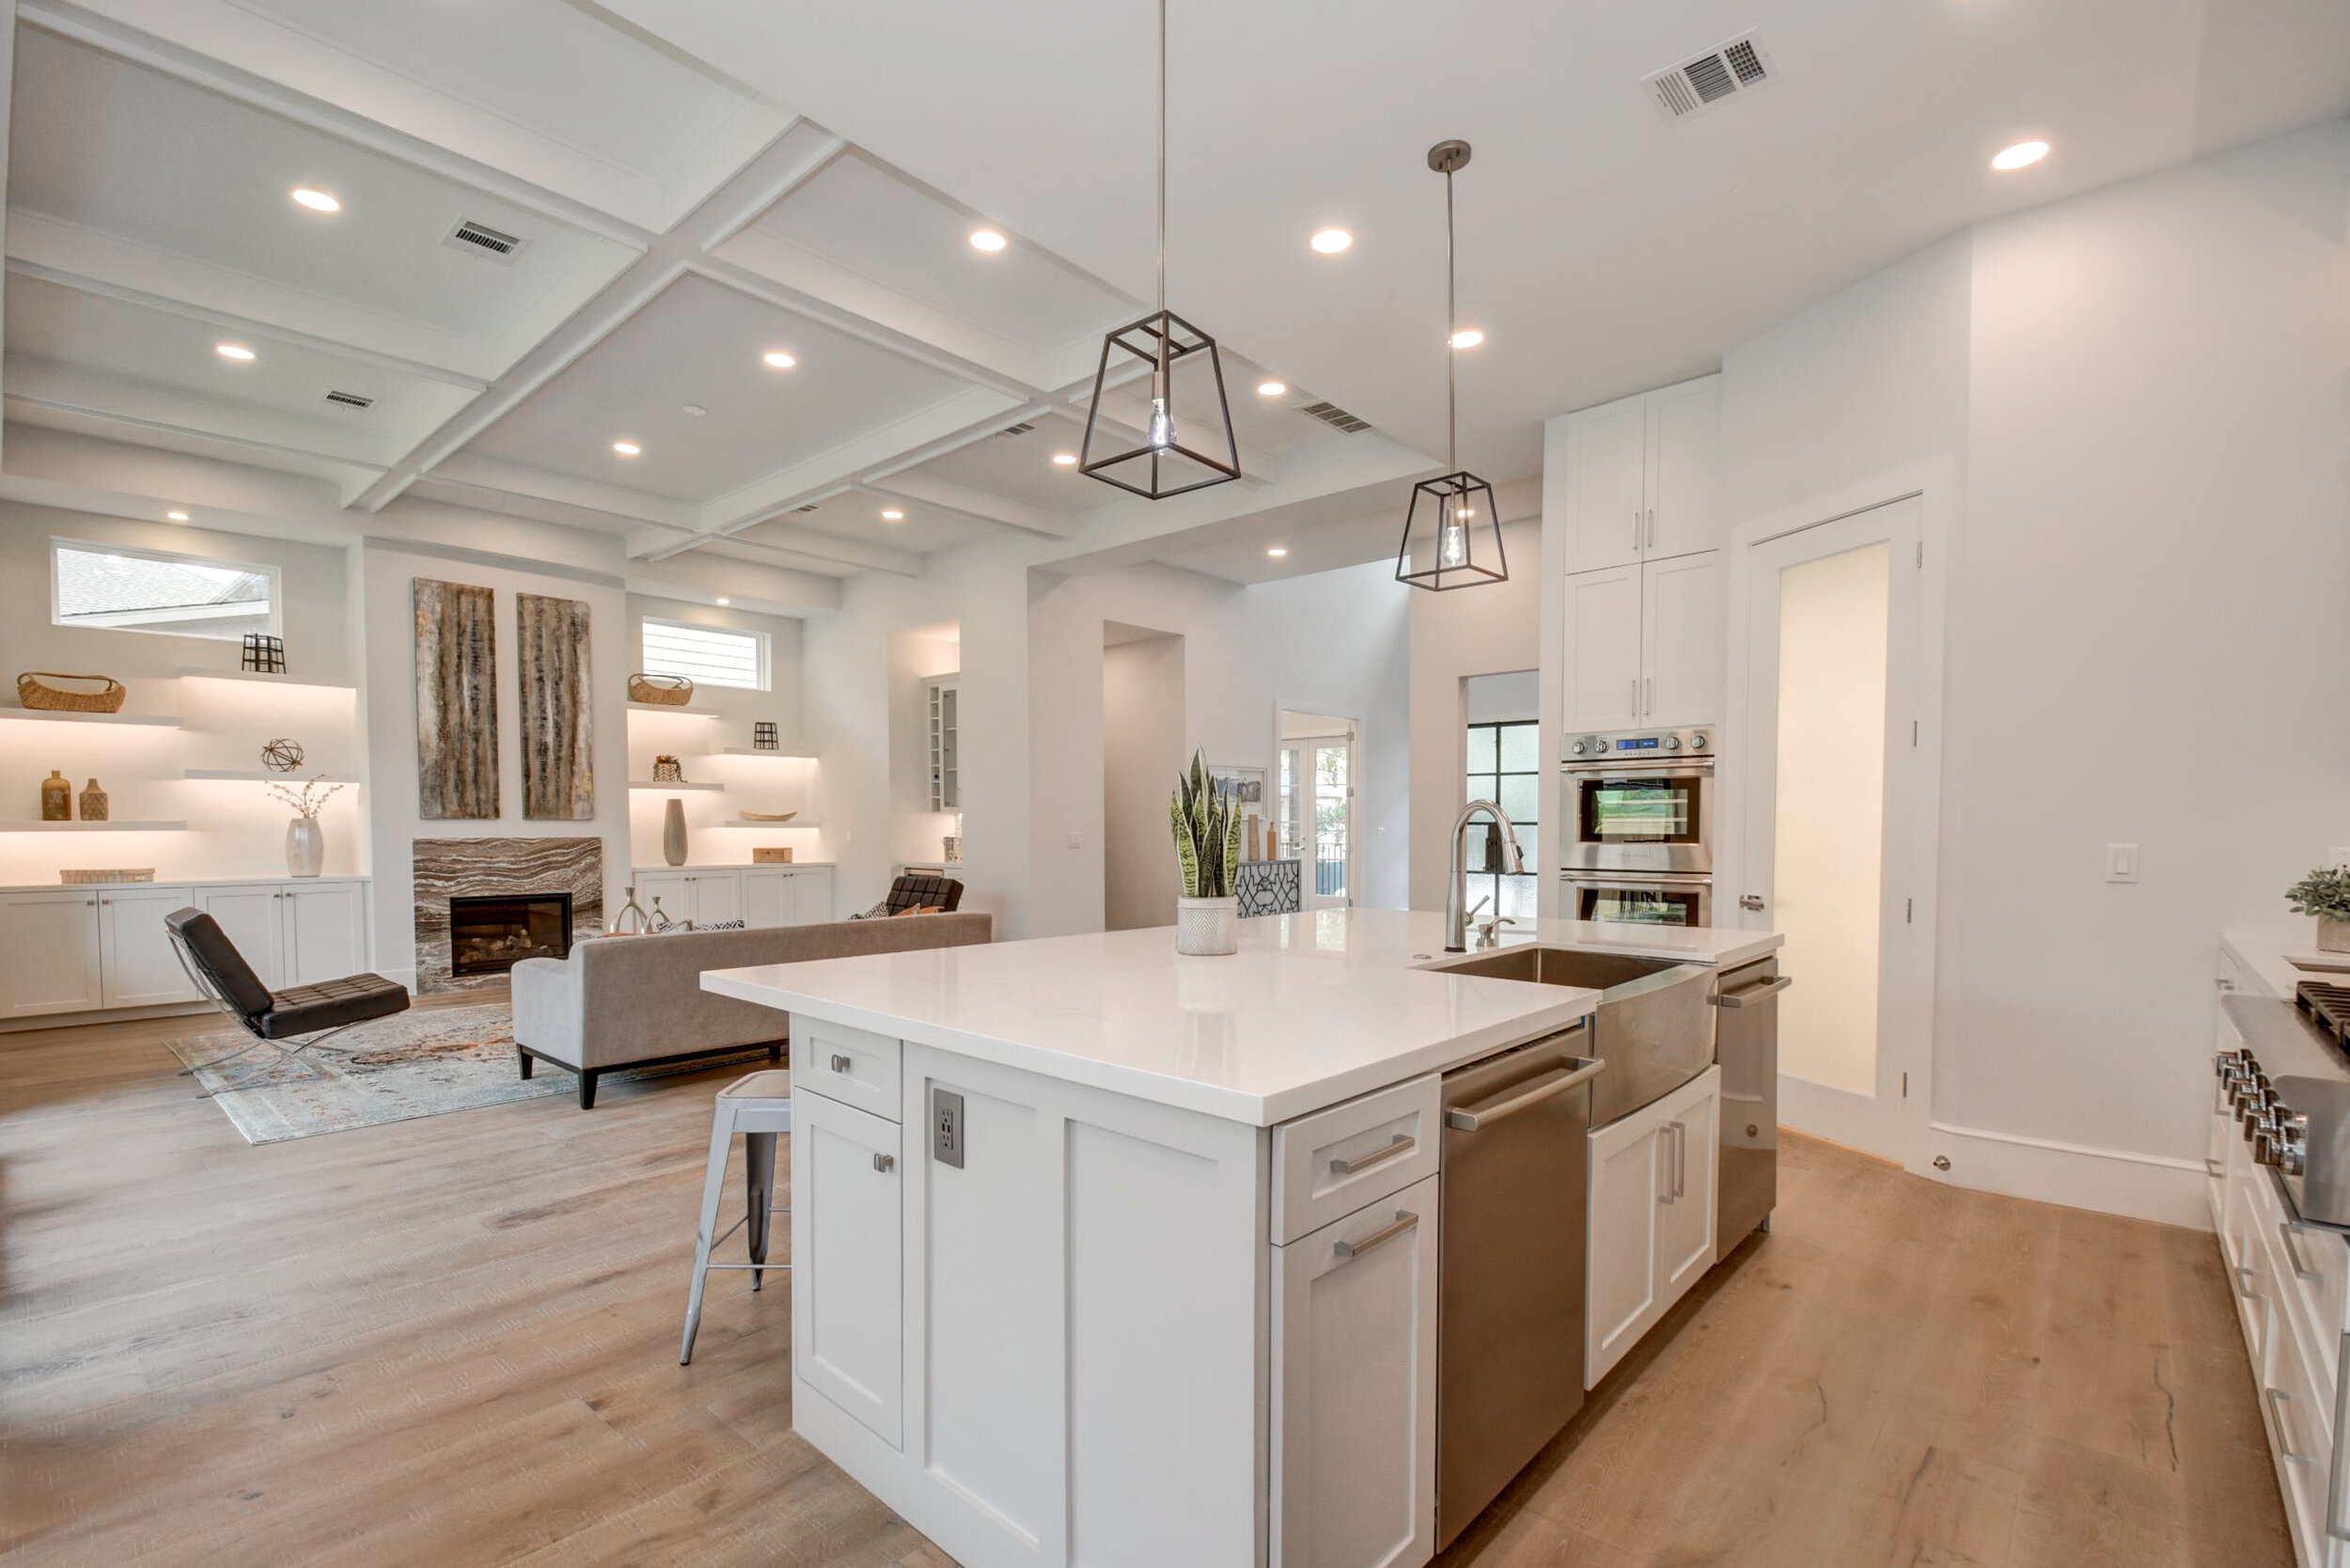 Benefits of Building a New Home: Creating Your Dream Kitchen